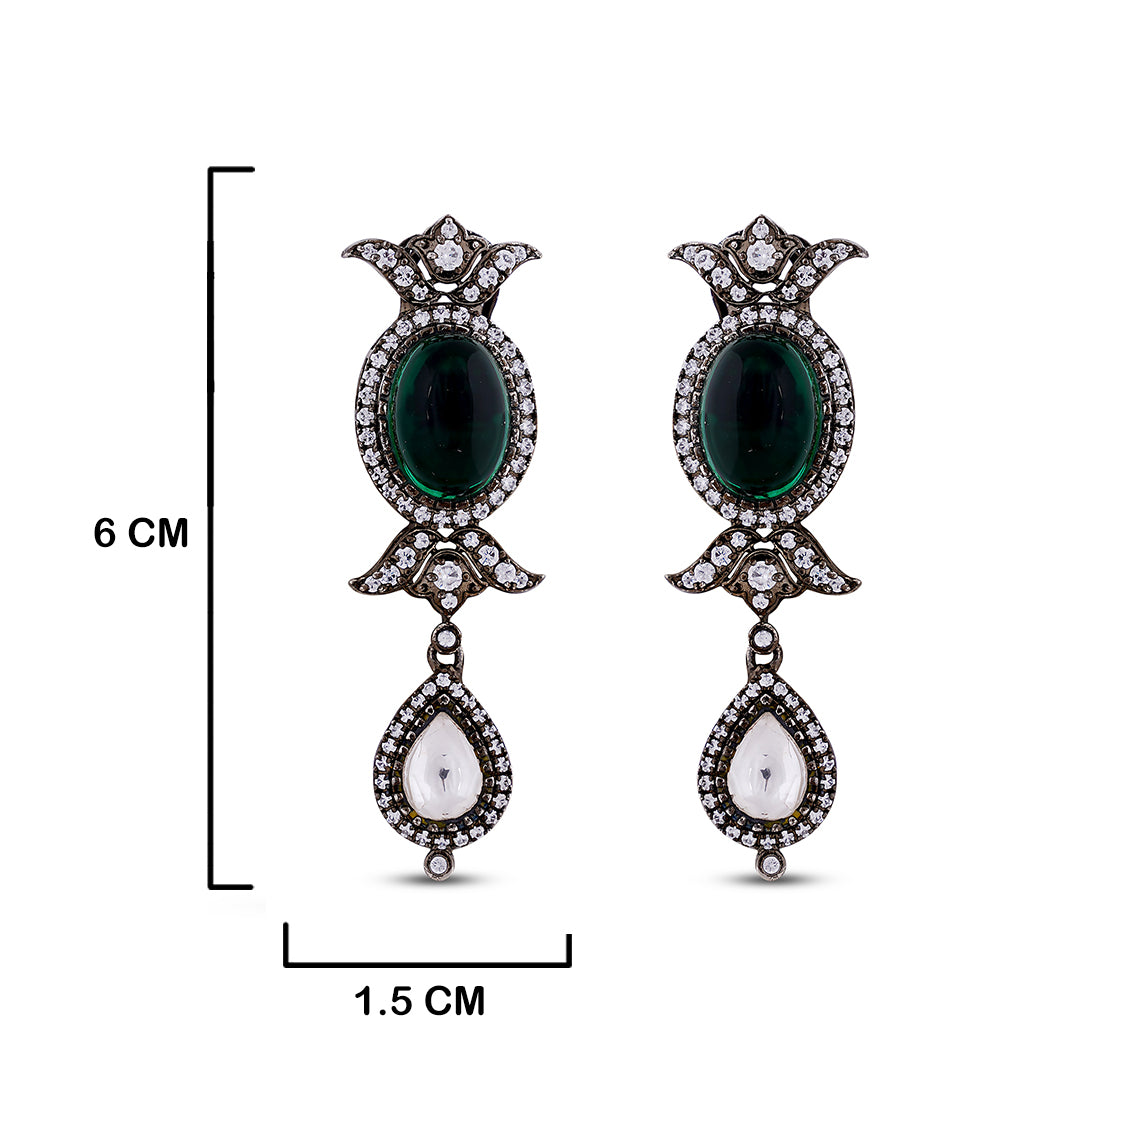 Green and White Stone CZ Earrings with measurements in cm. 6cm by 1.5cm.